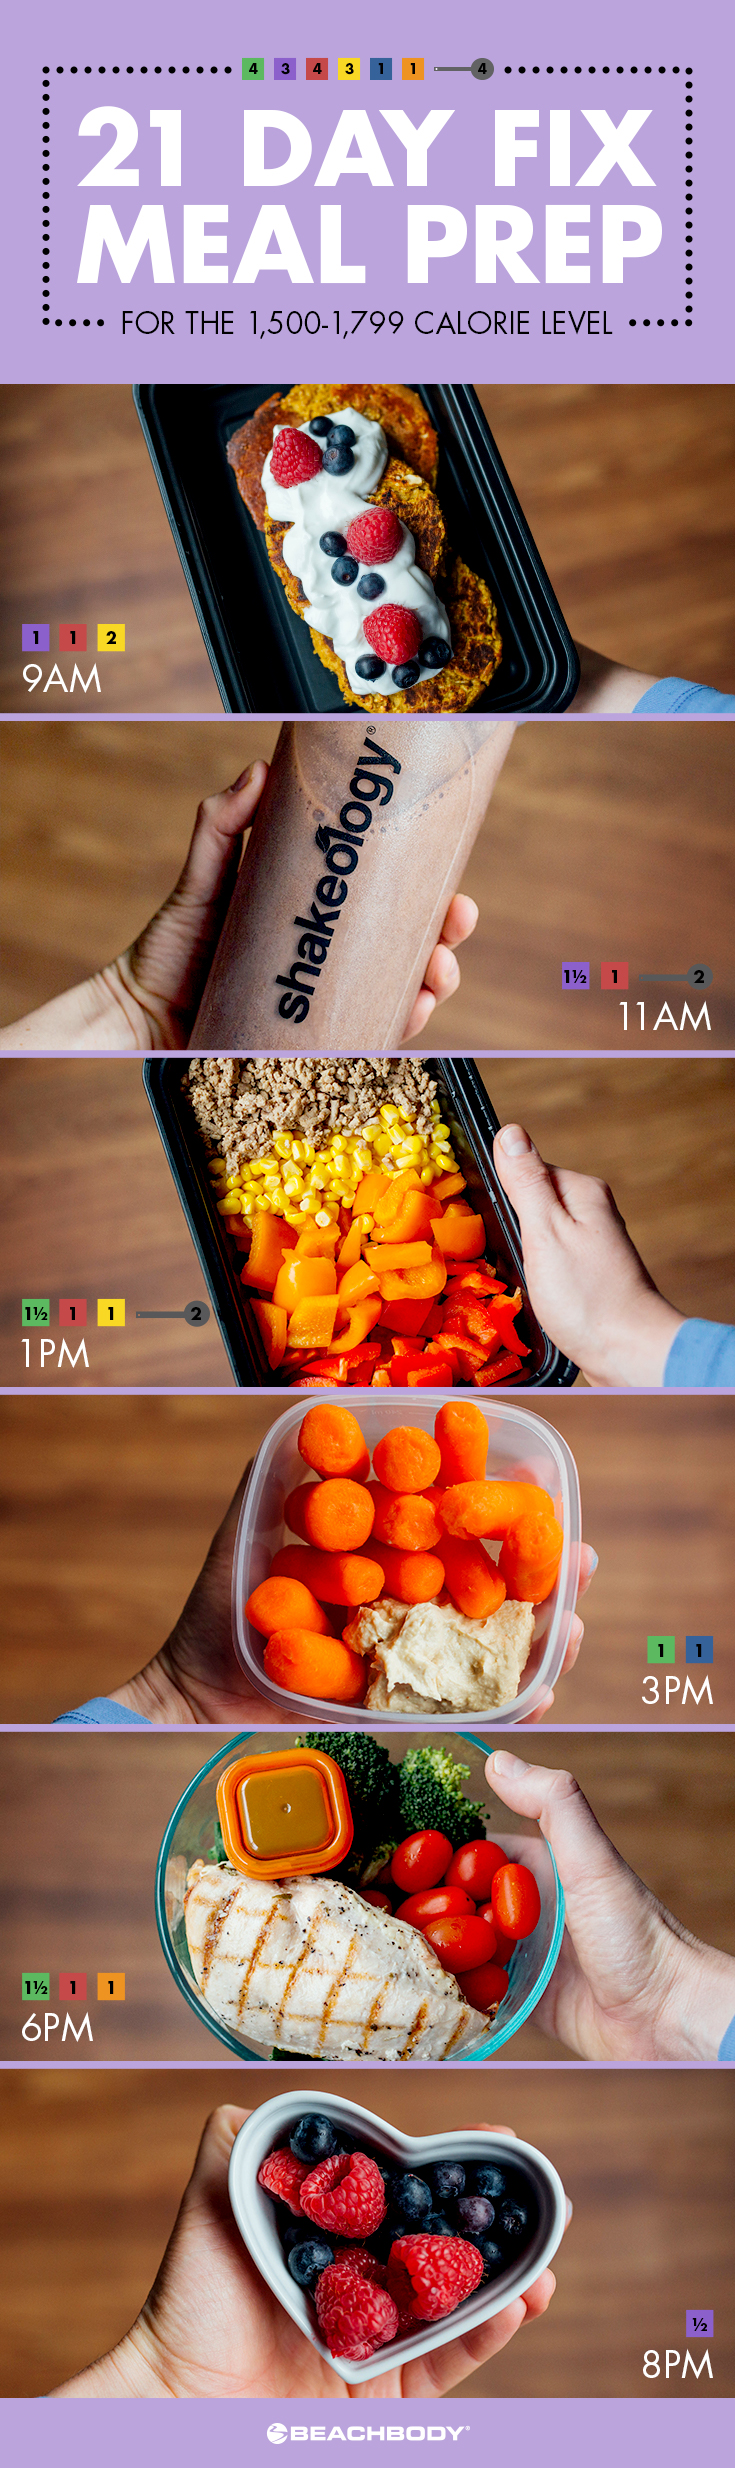 Quick and Simple 21 Day Fix Meal Preps for Every Calorie Level, by Lena  Little